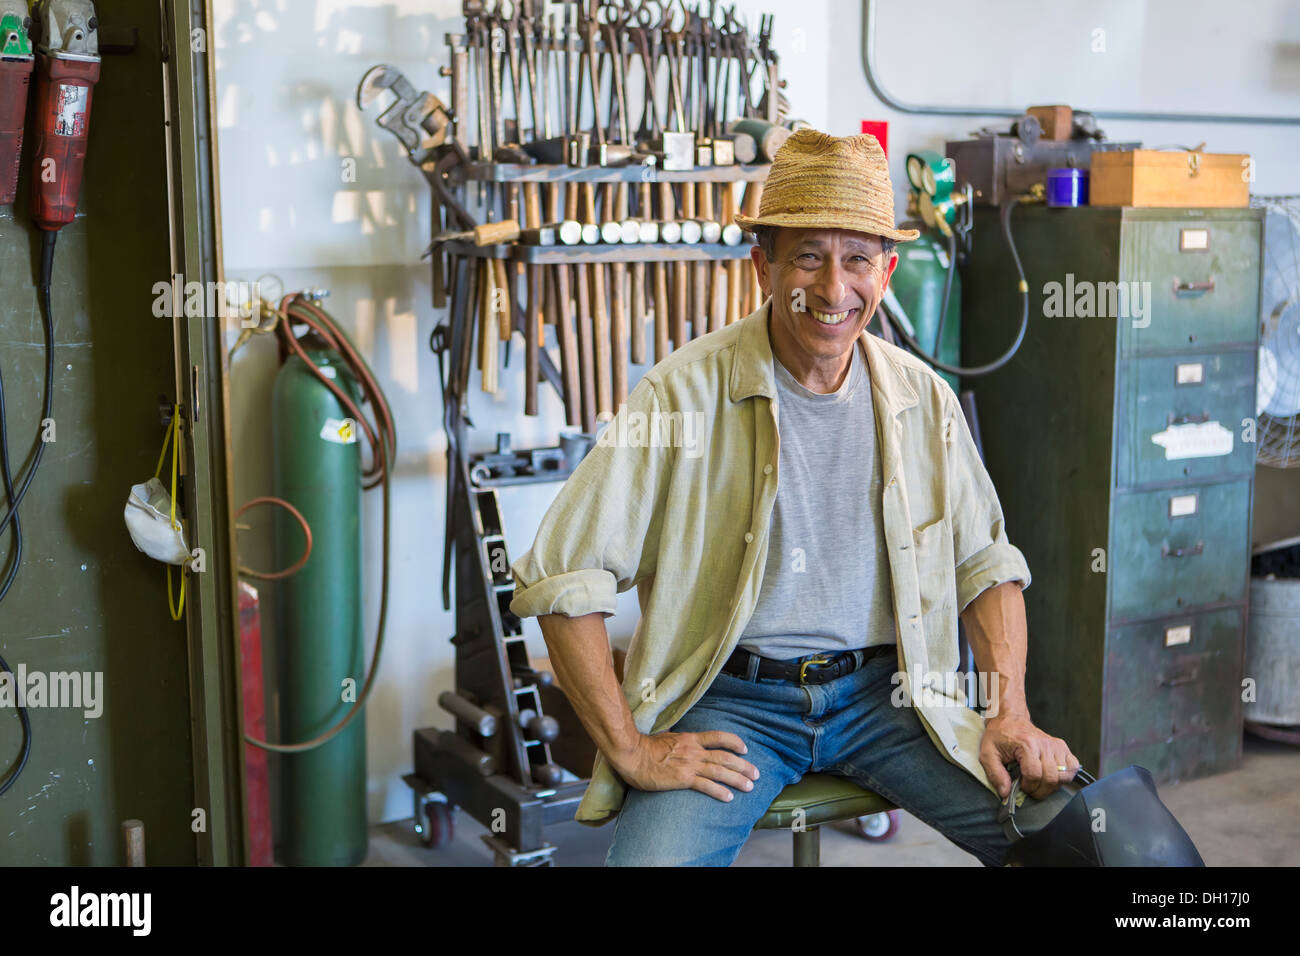 Middle Eastern man smiling in workshop Stock Photo